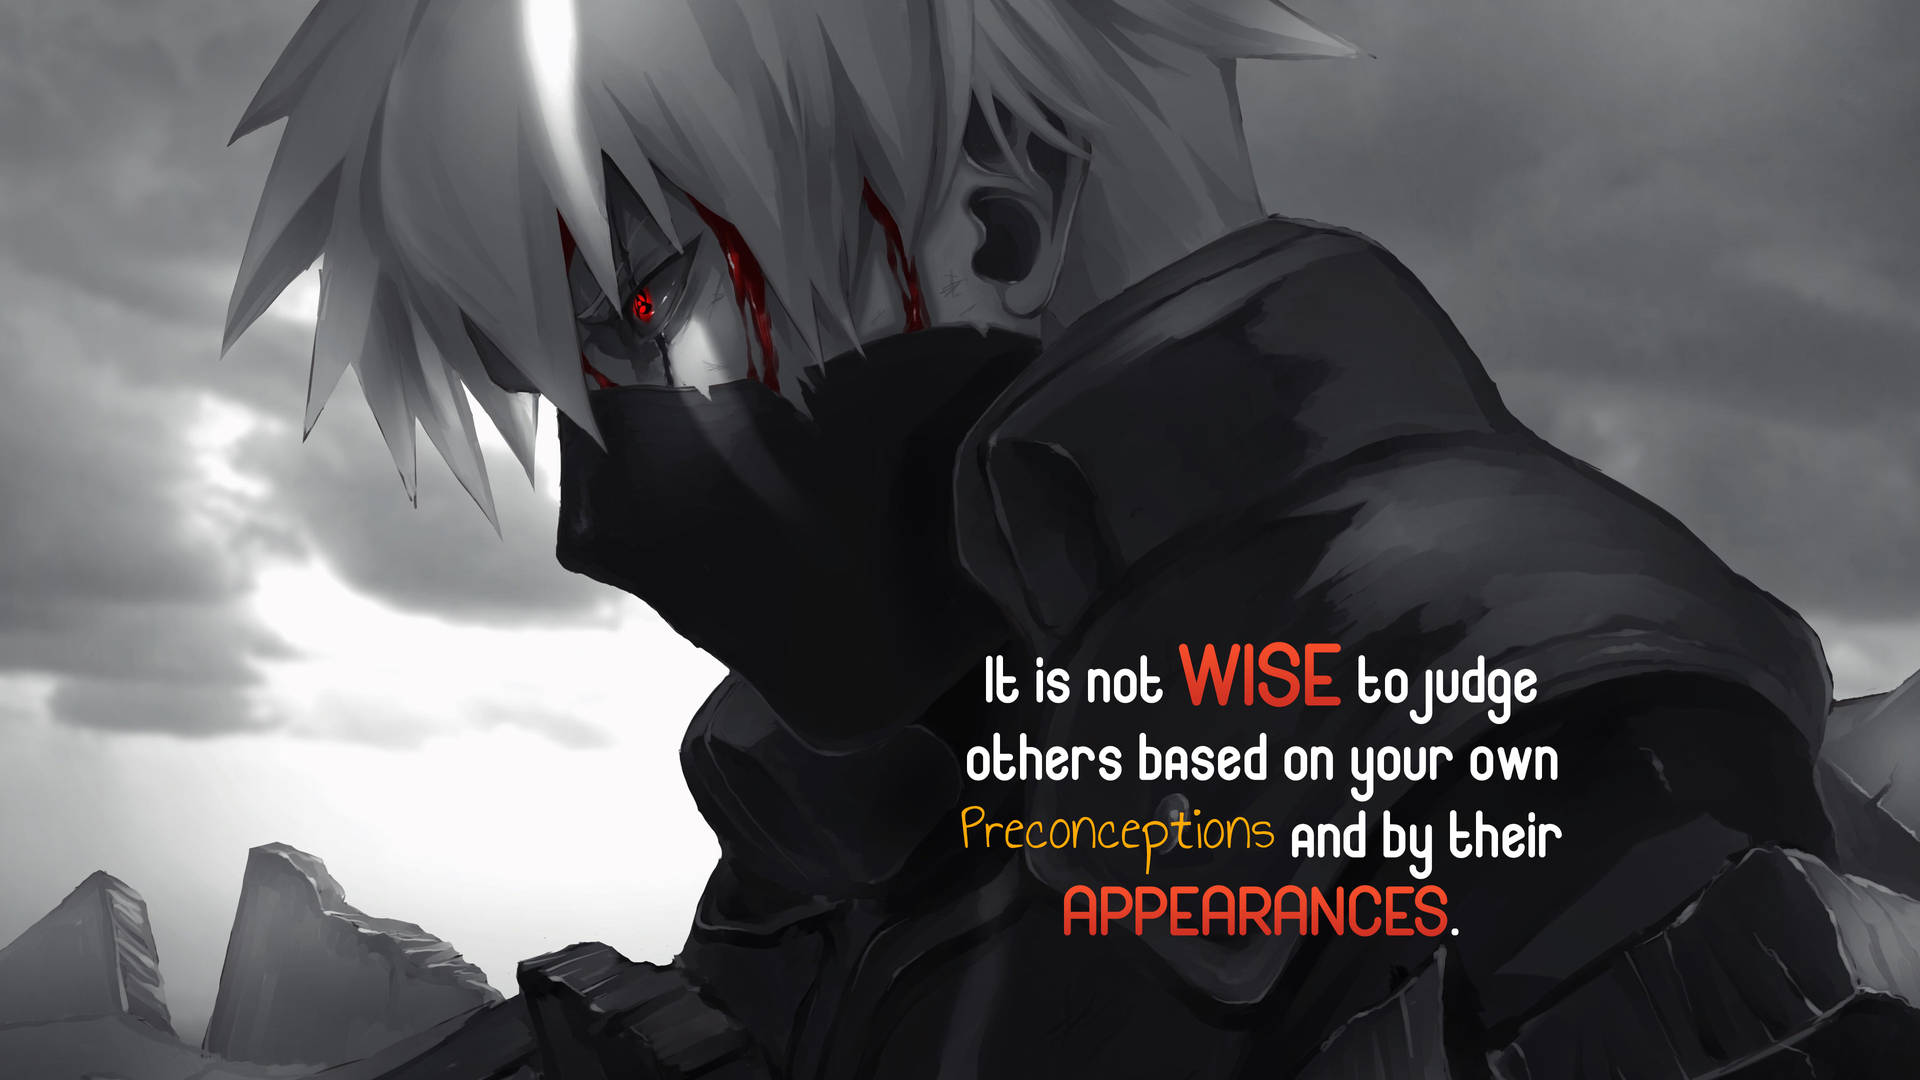 Free Naruto Quotes Wallpaper Downloads, [100+] Naruto Quotes Wallpapers for  FREE 